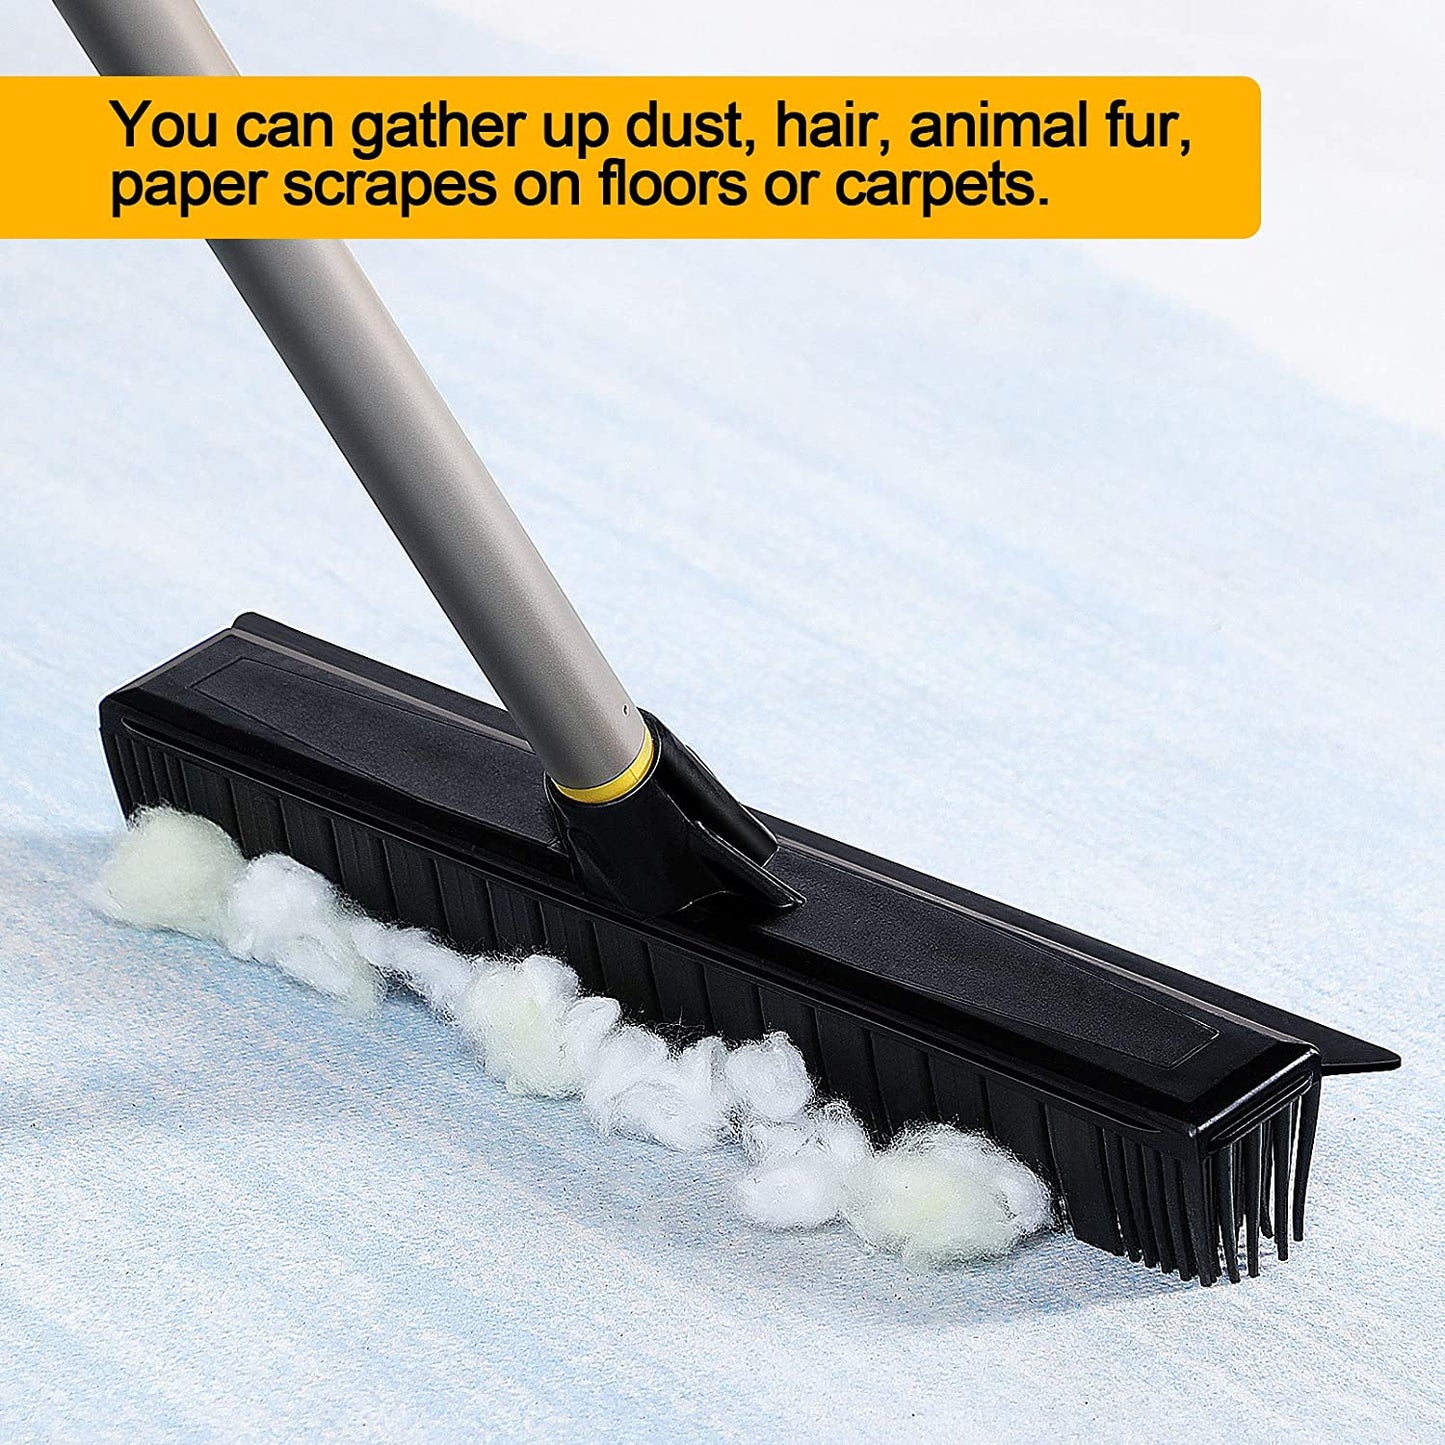 Yocada Rubber Broom Pet Hair Fur Removal Broom Soft Bristle Push Broom with Squeegee Telescoping Pole 42-53 Inch for Sweeping Hardwood Floor Tile Bathroom Living Room Kitchen